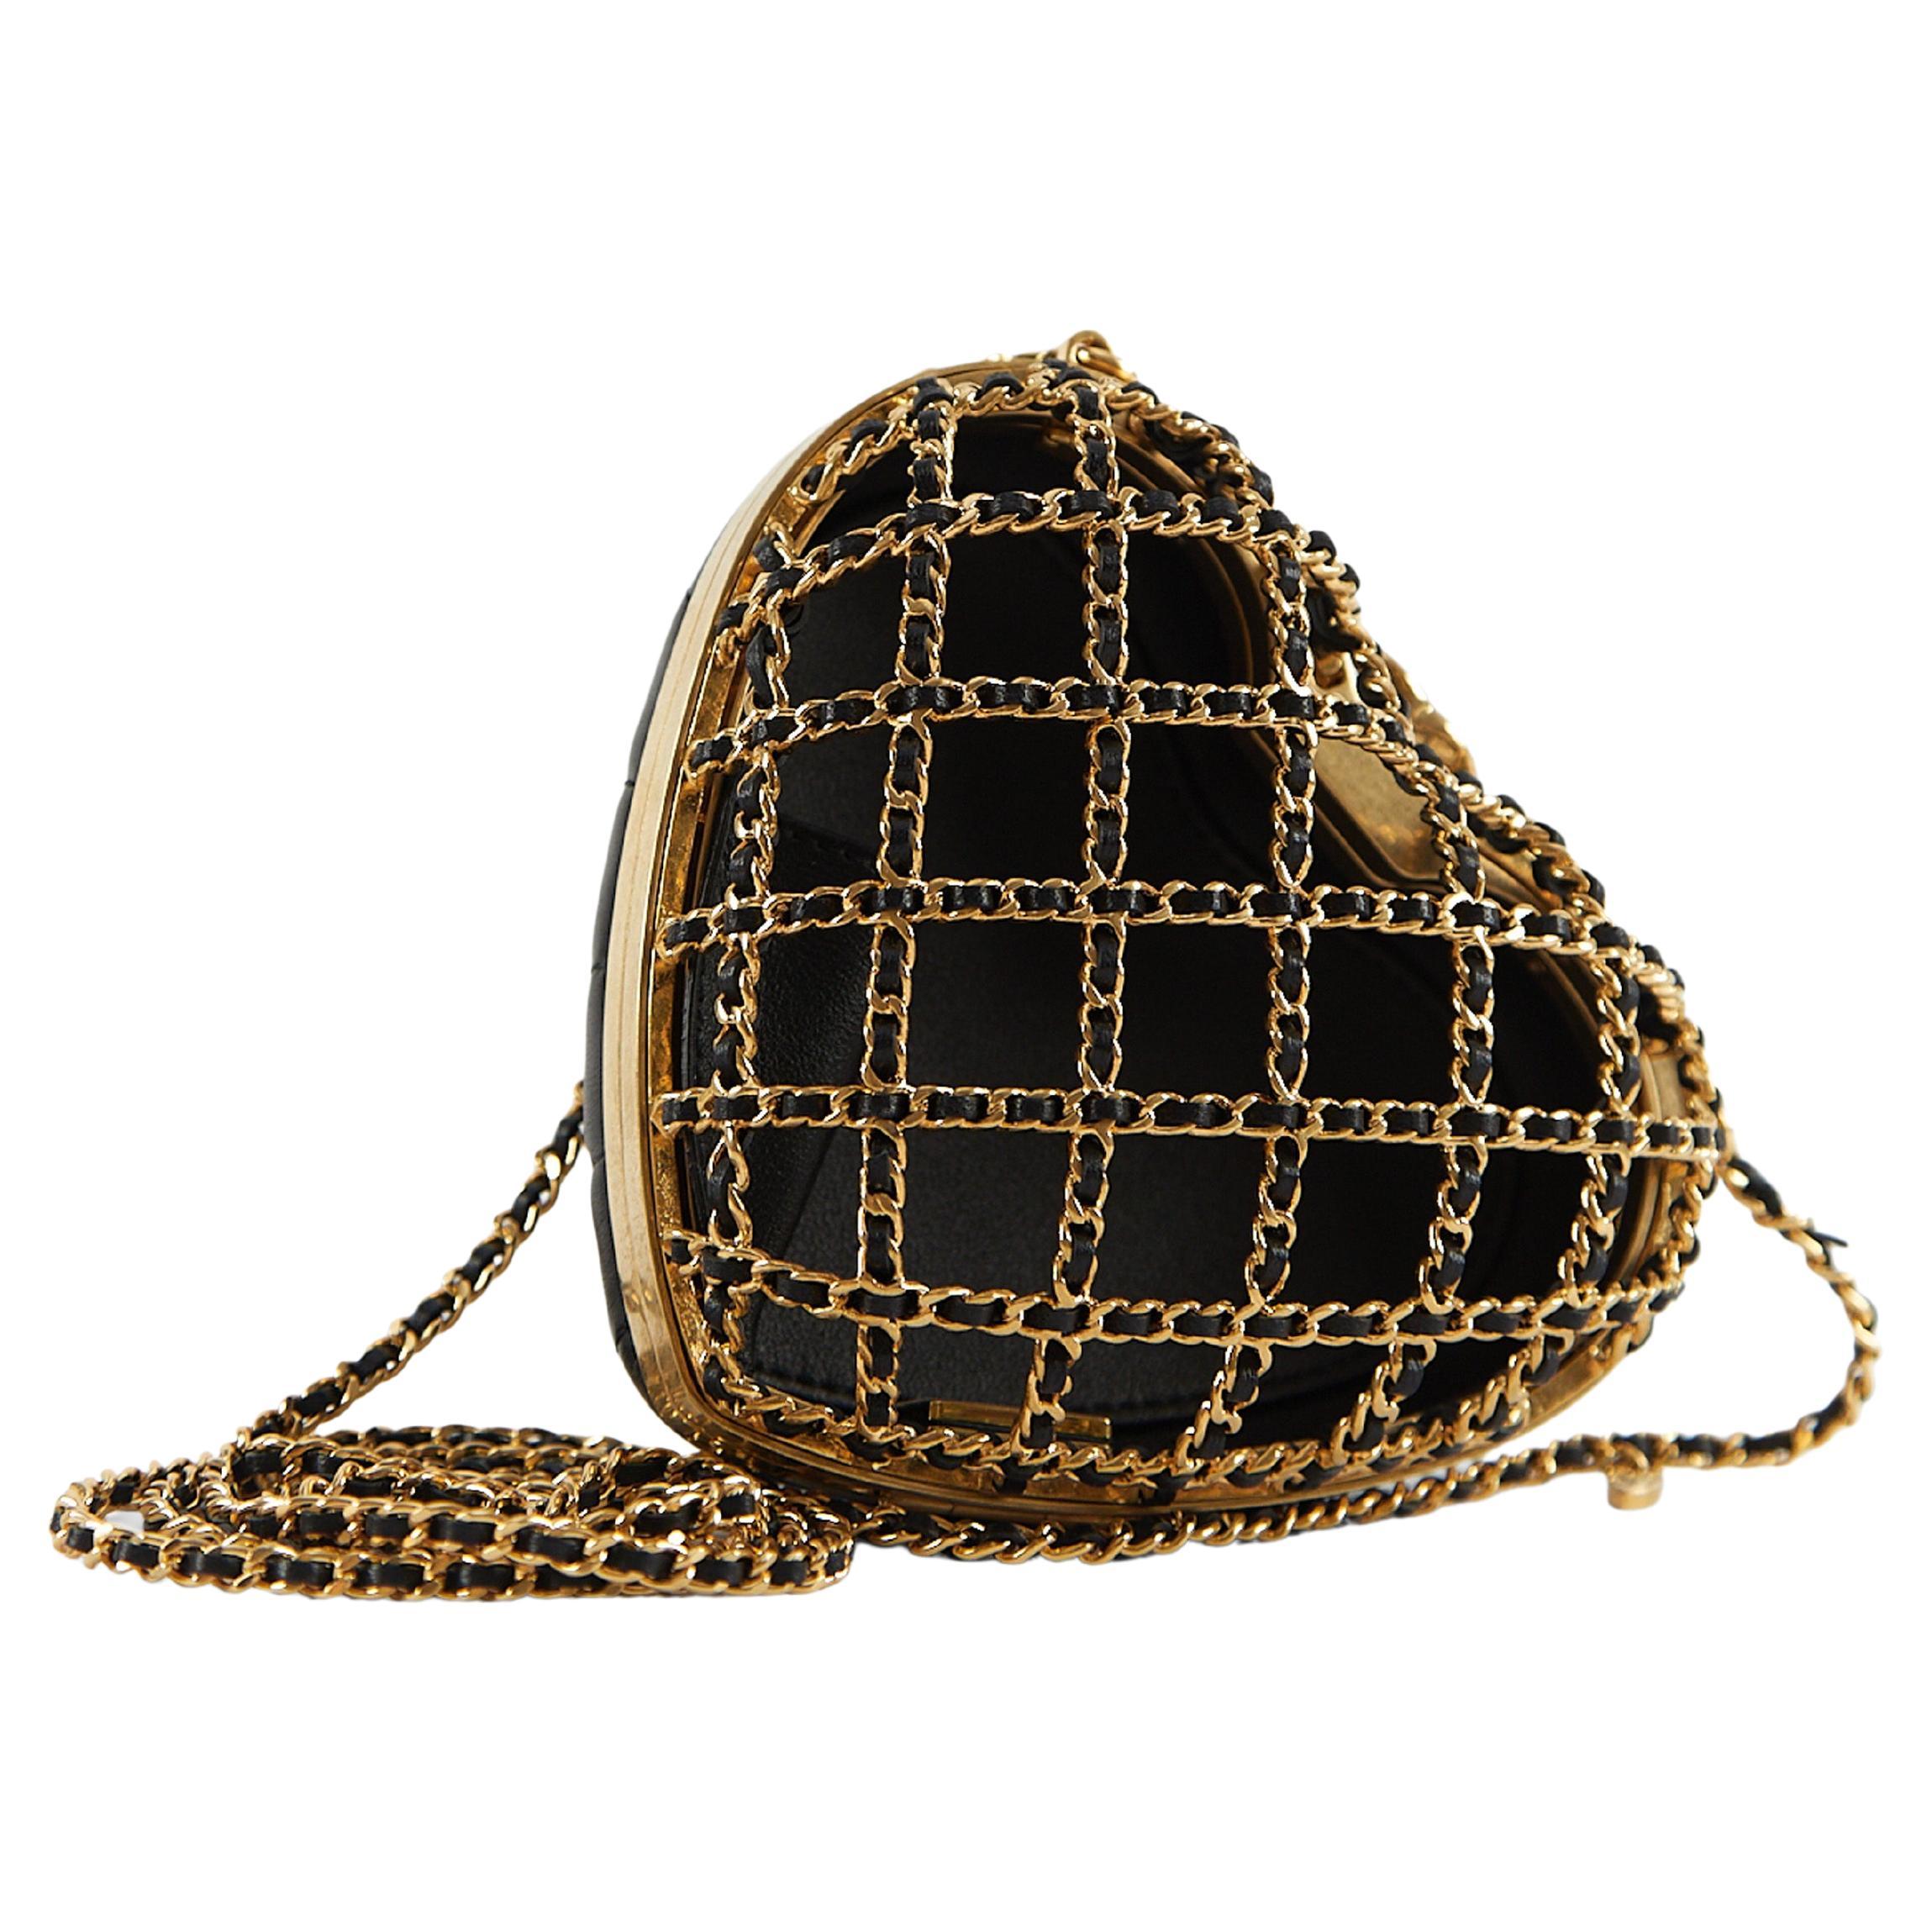 CHANEL HEART MINAUDIERE BAG Black and Gold-Tone Hardware For Sale